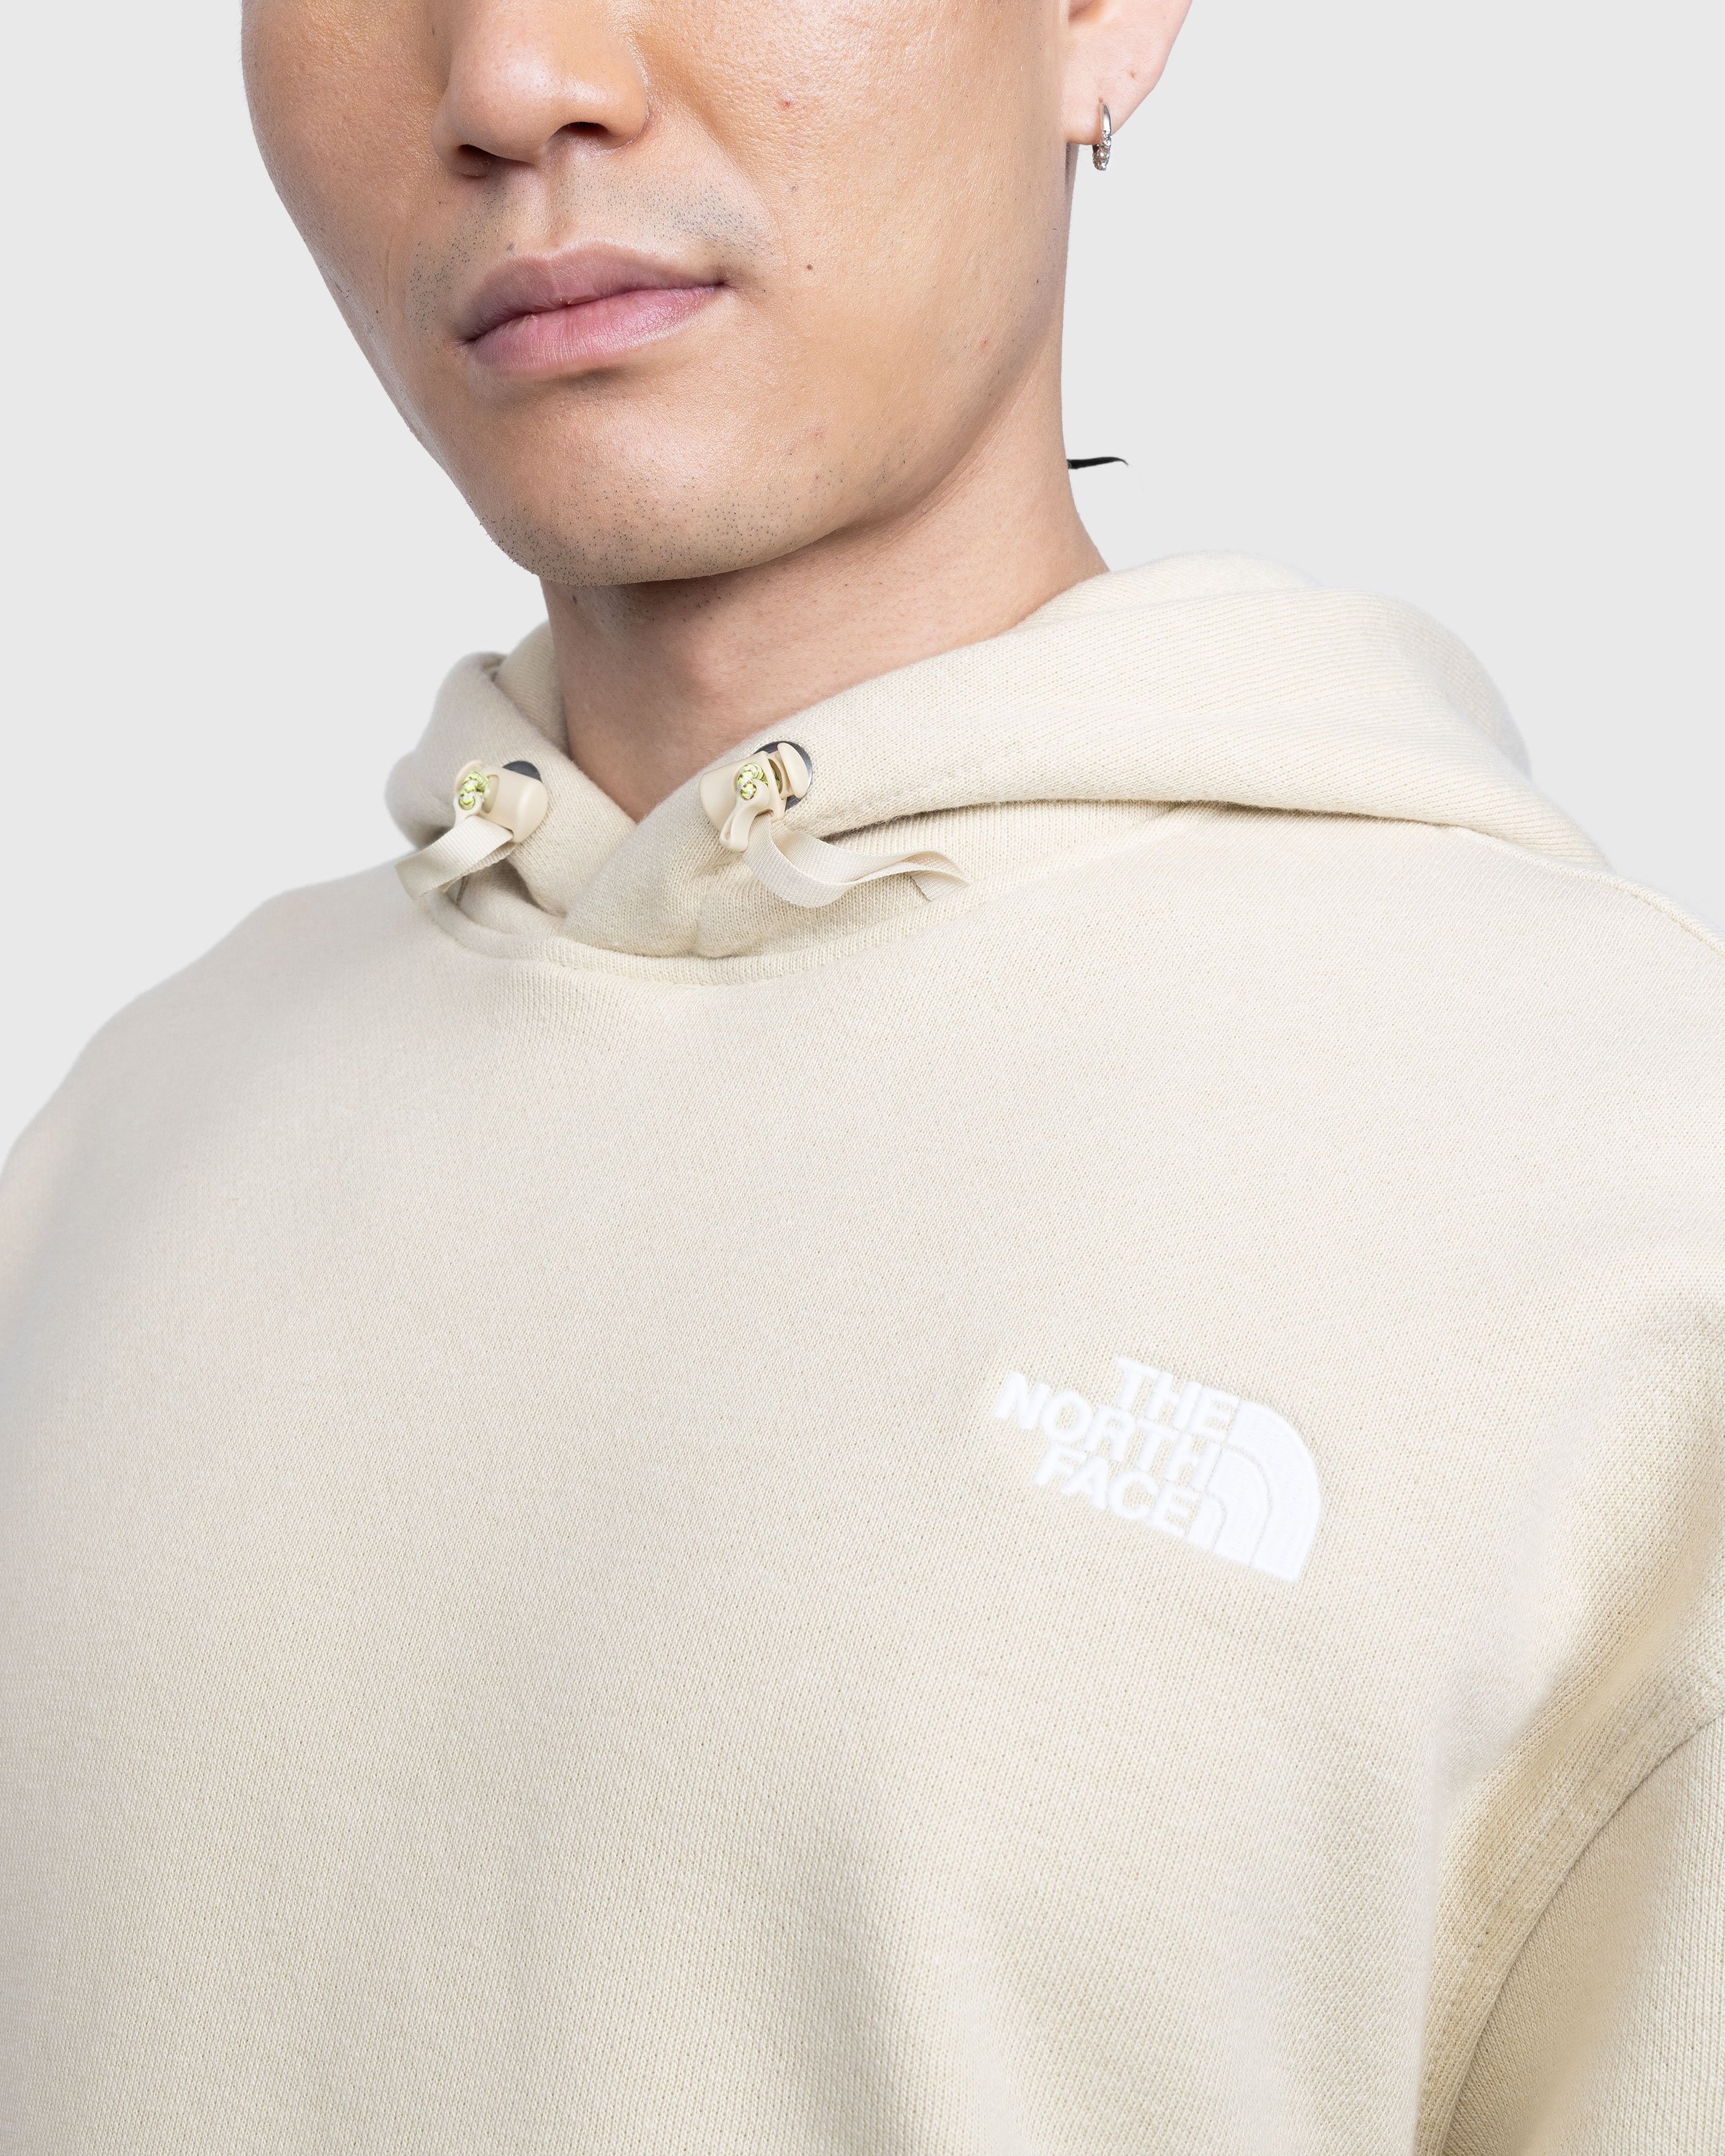 The North Face – Icon Hoodie Gravel - Sweats - Grey - Image 4